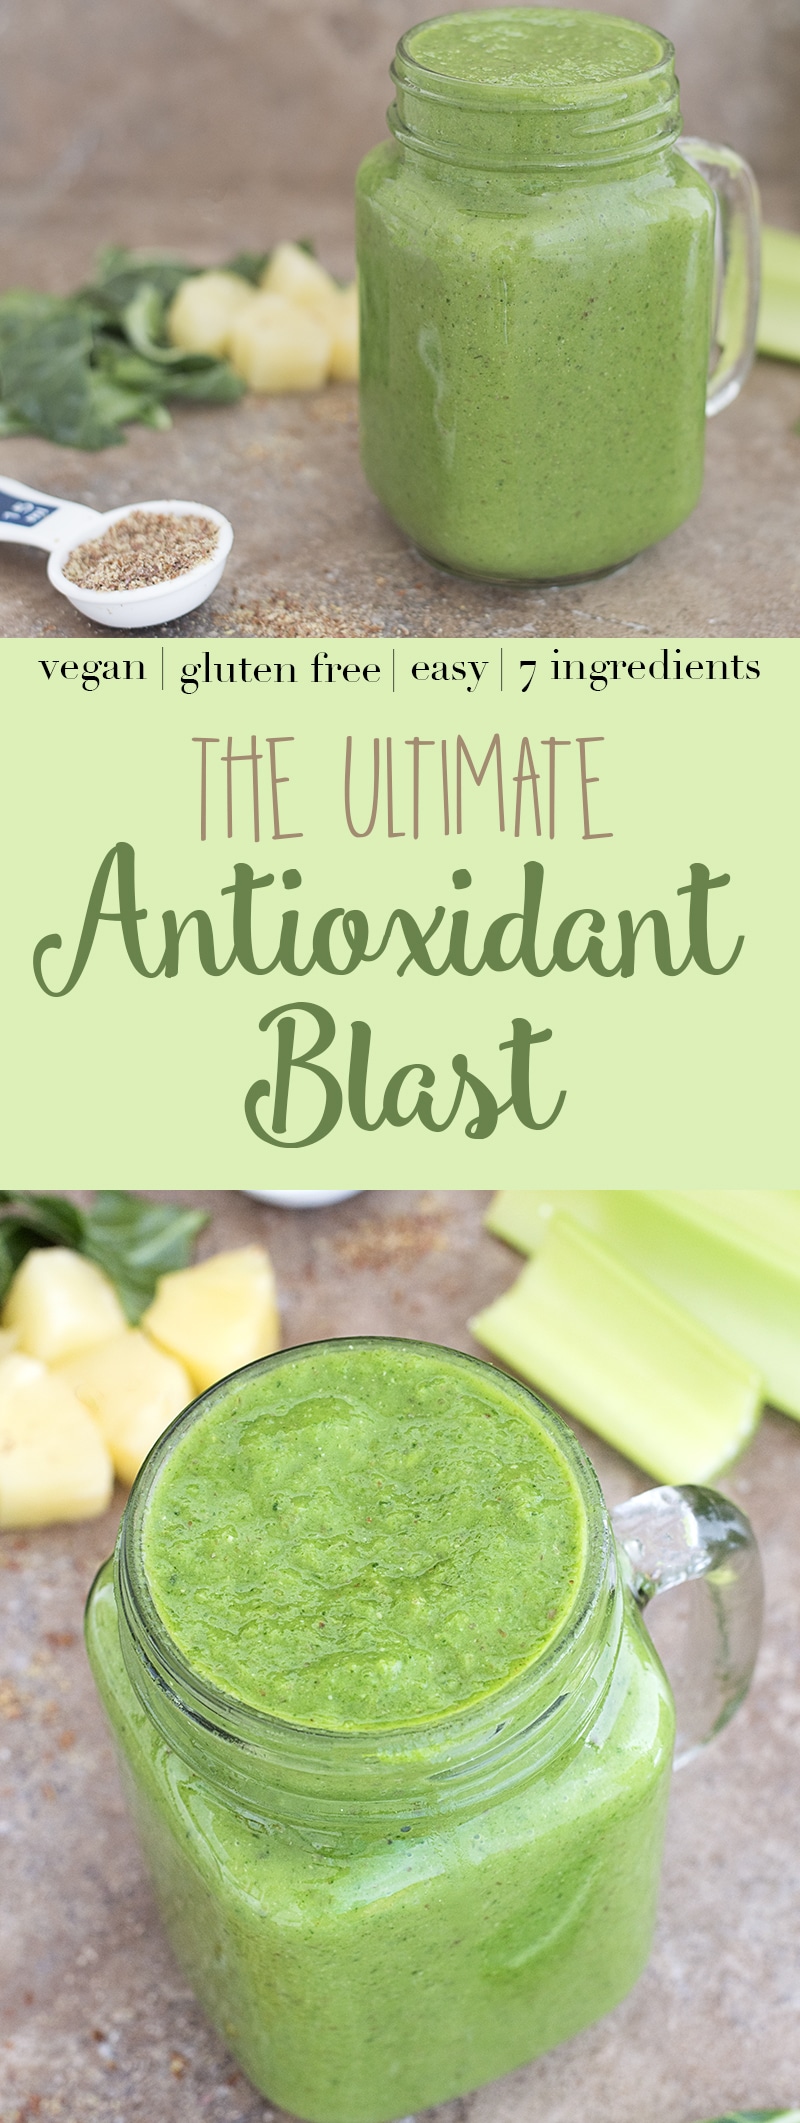 Packed with mighty ingredients, this ultimate antioxidant blast is a powerful way to start your day. Needs only 7 ingredients and takes only 15 minutes to make